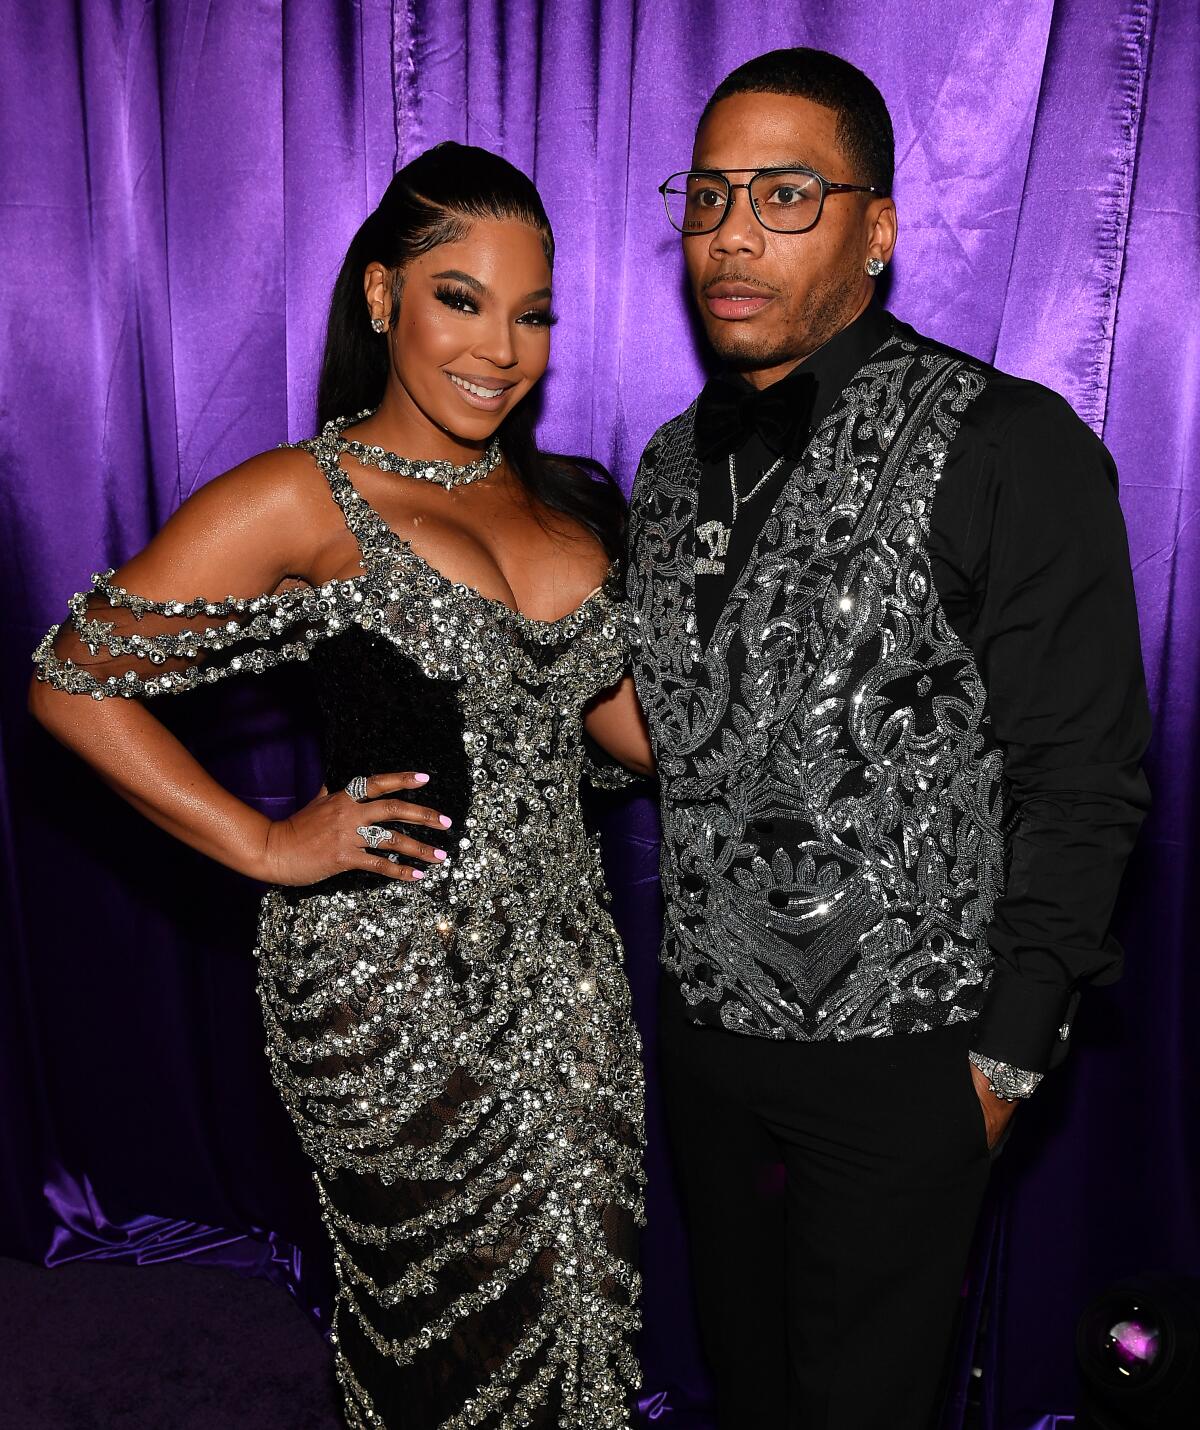 Ashanti smiles in a glittery gown while standing with her arm around rapper Nelly in a glittery vest